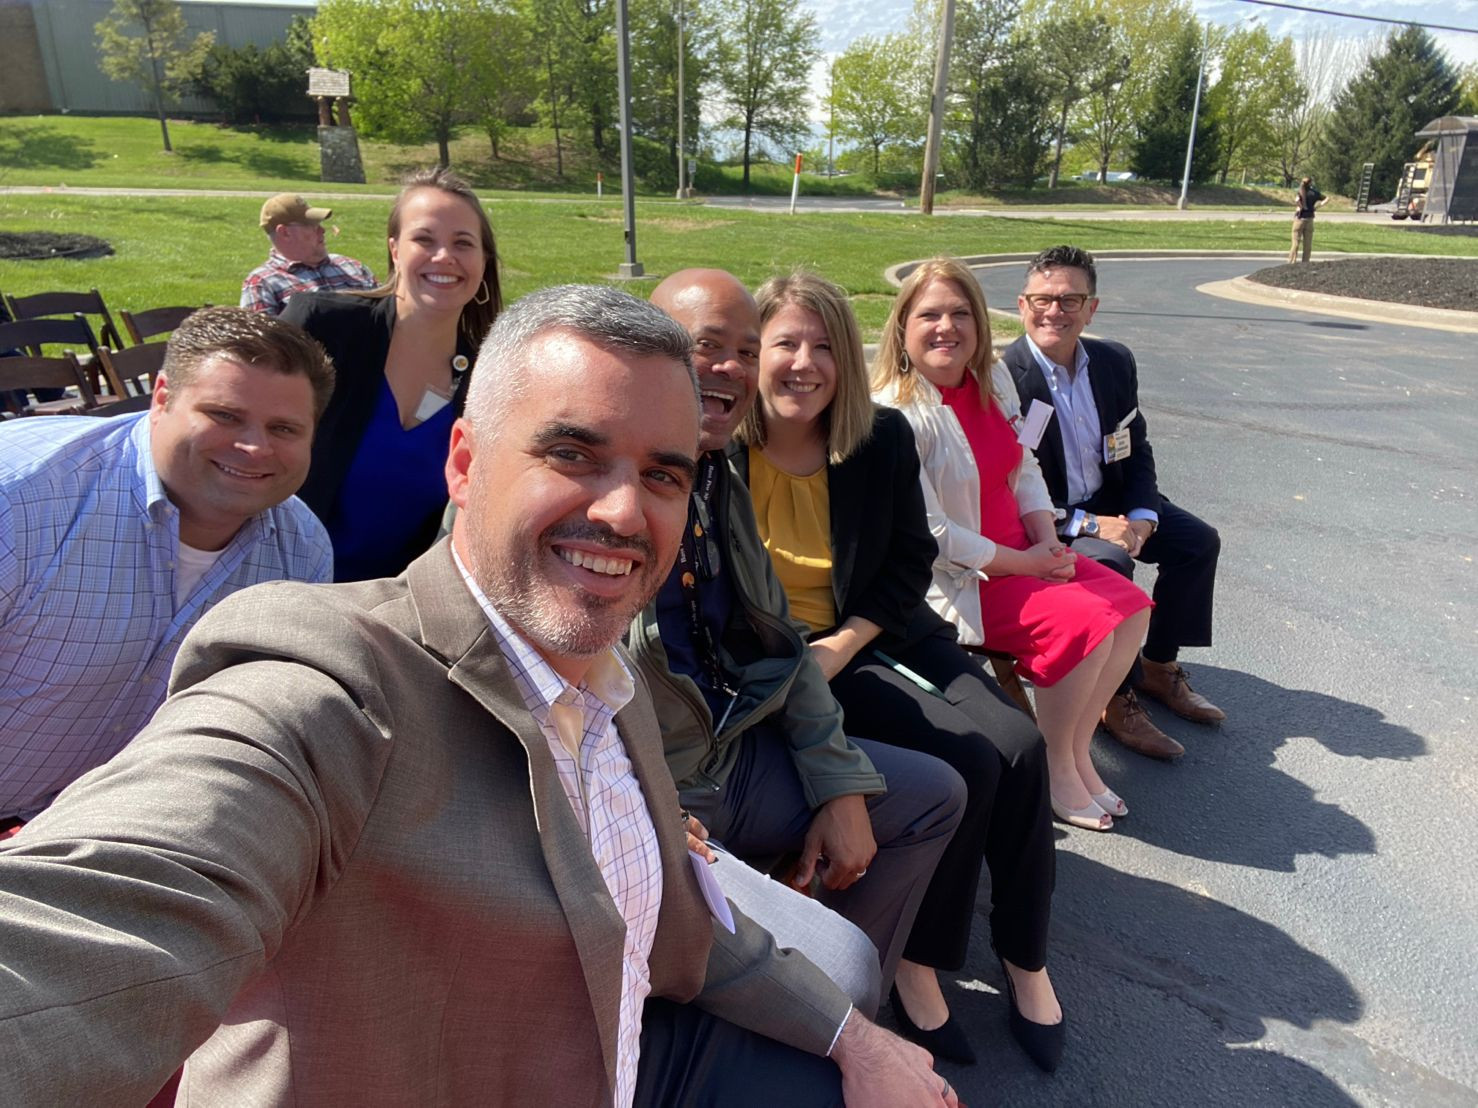 Our teams enjoy staying connected outside of work to celebrate events and each other!